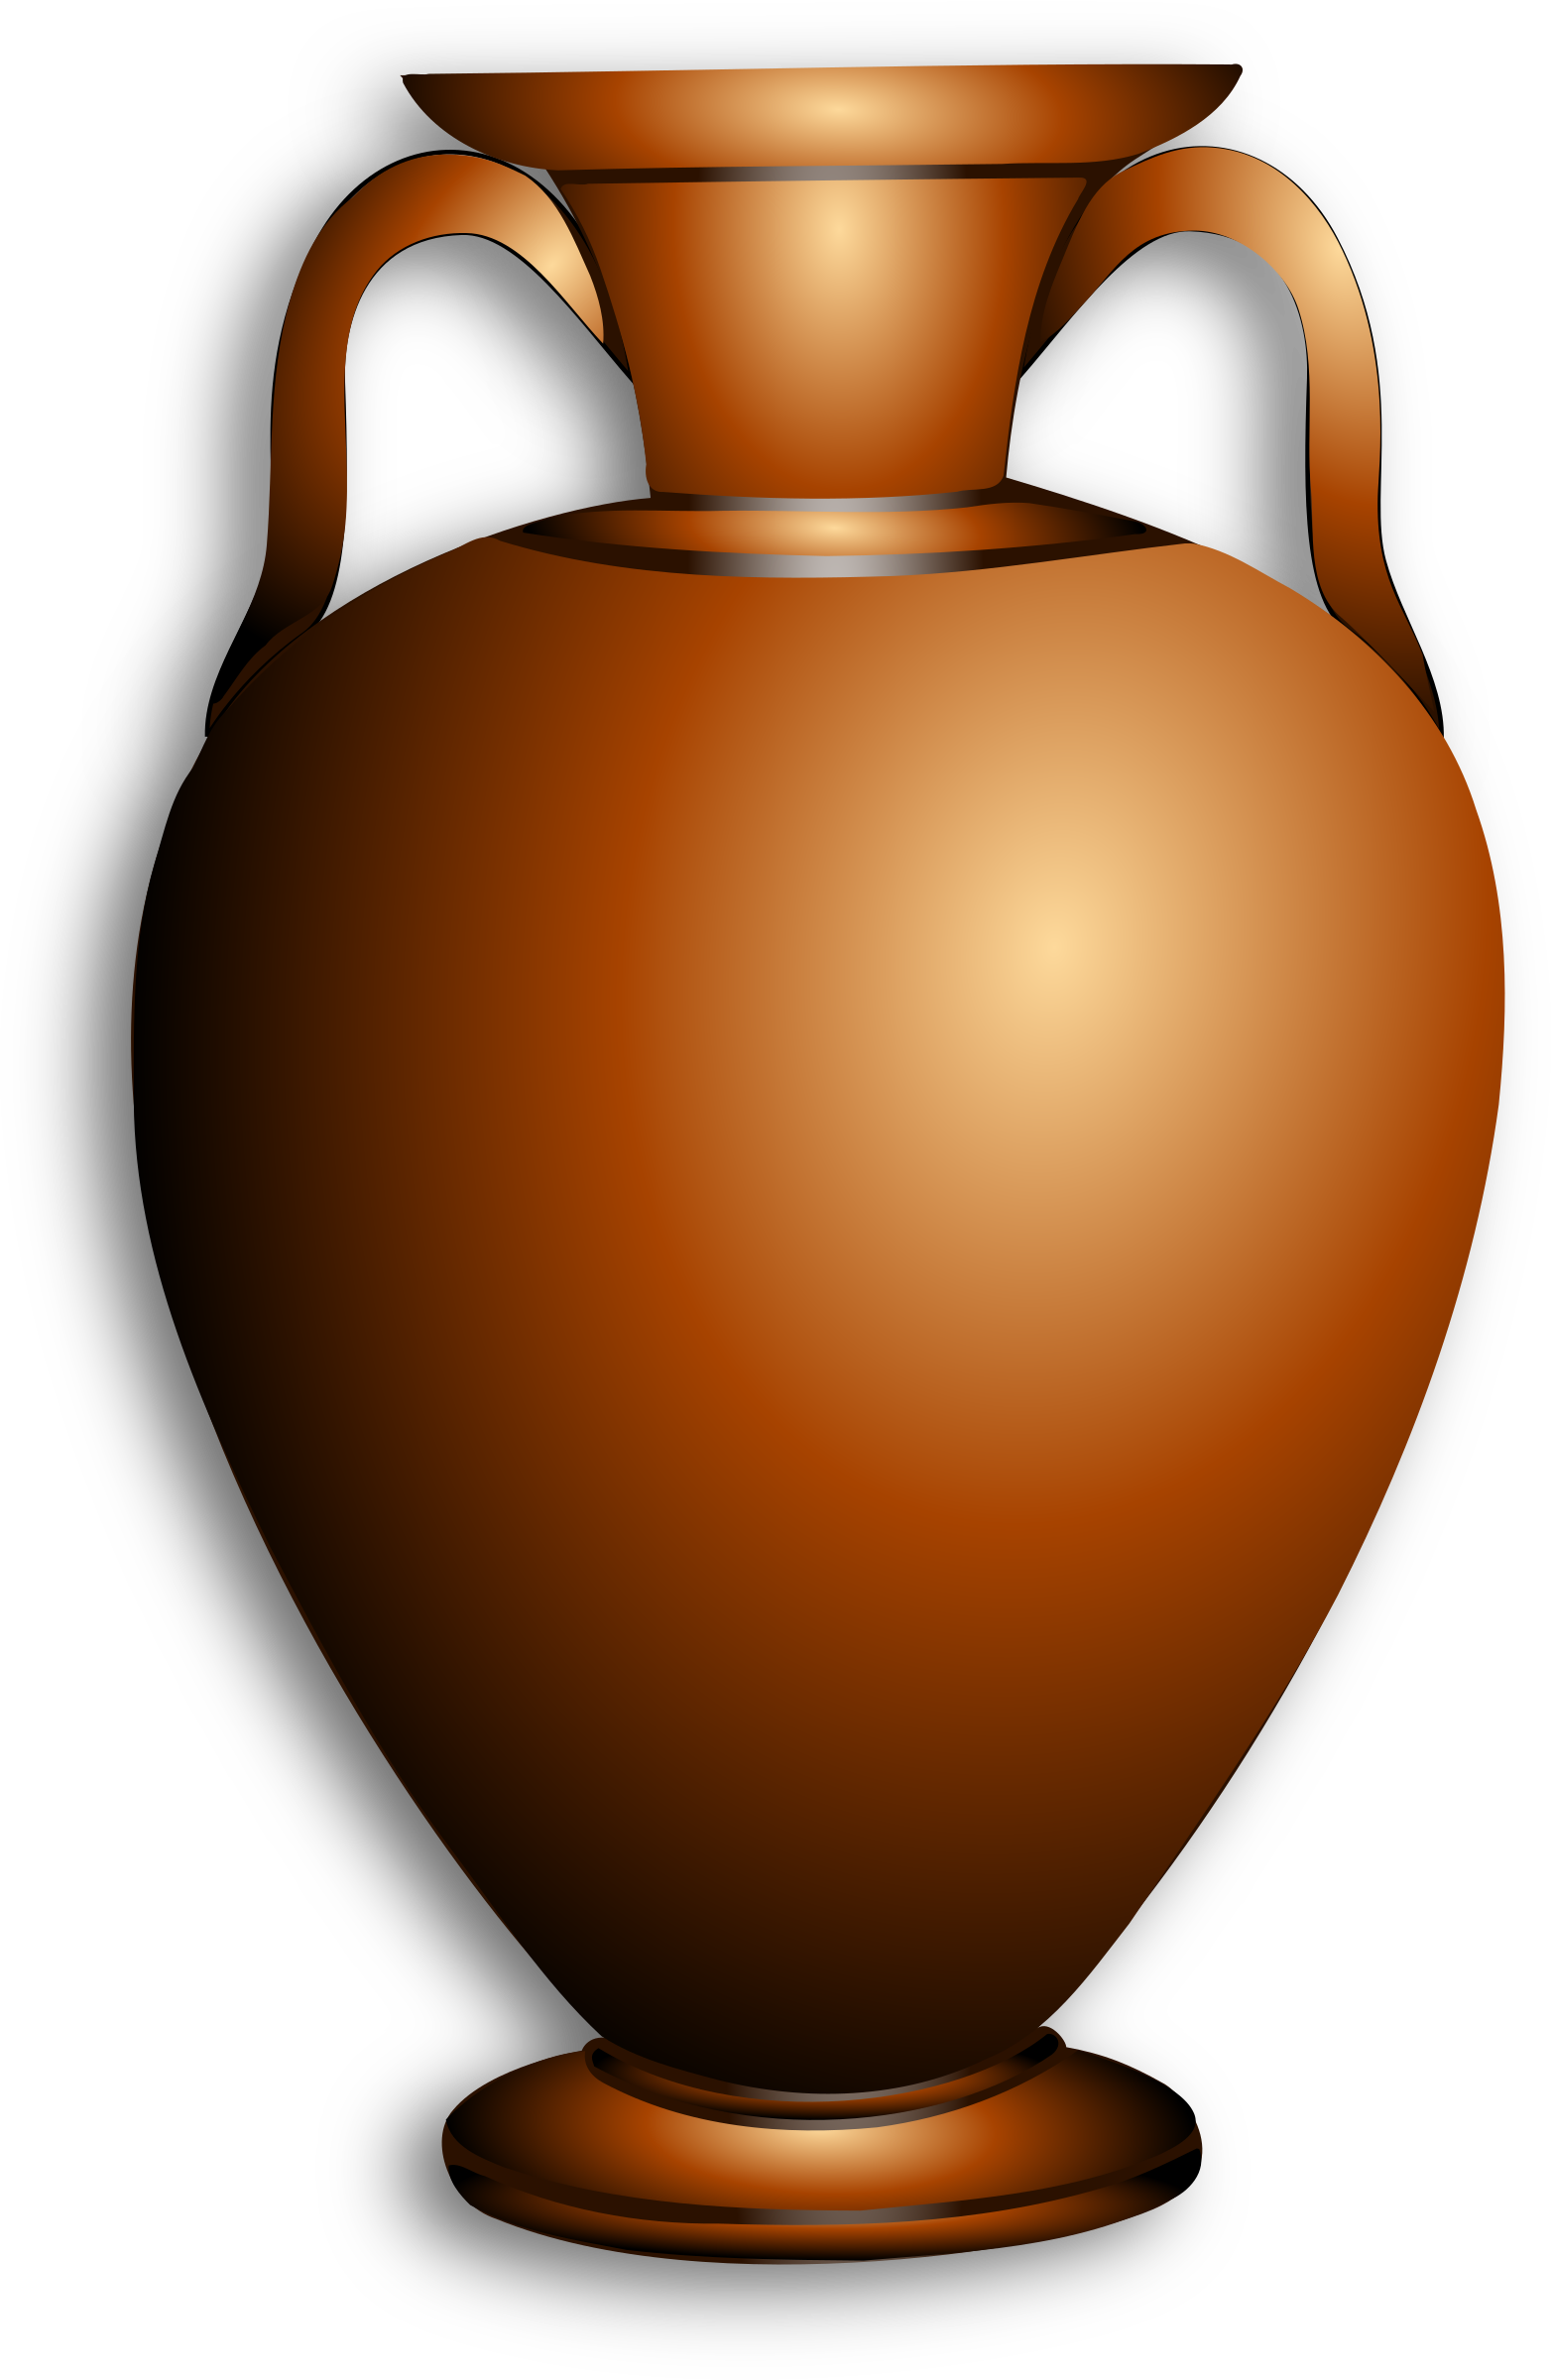 pottery clipart vector